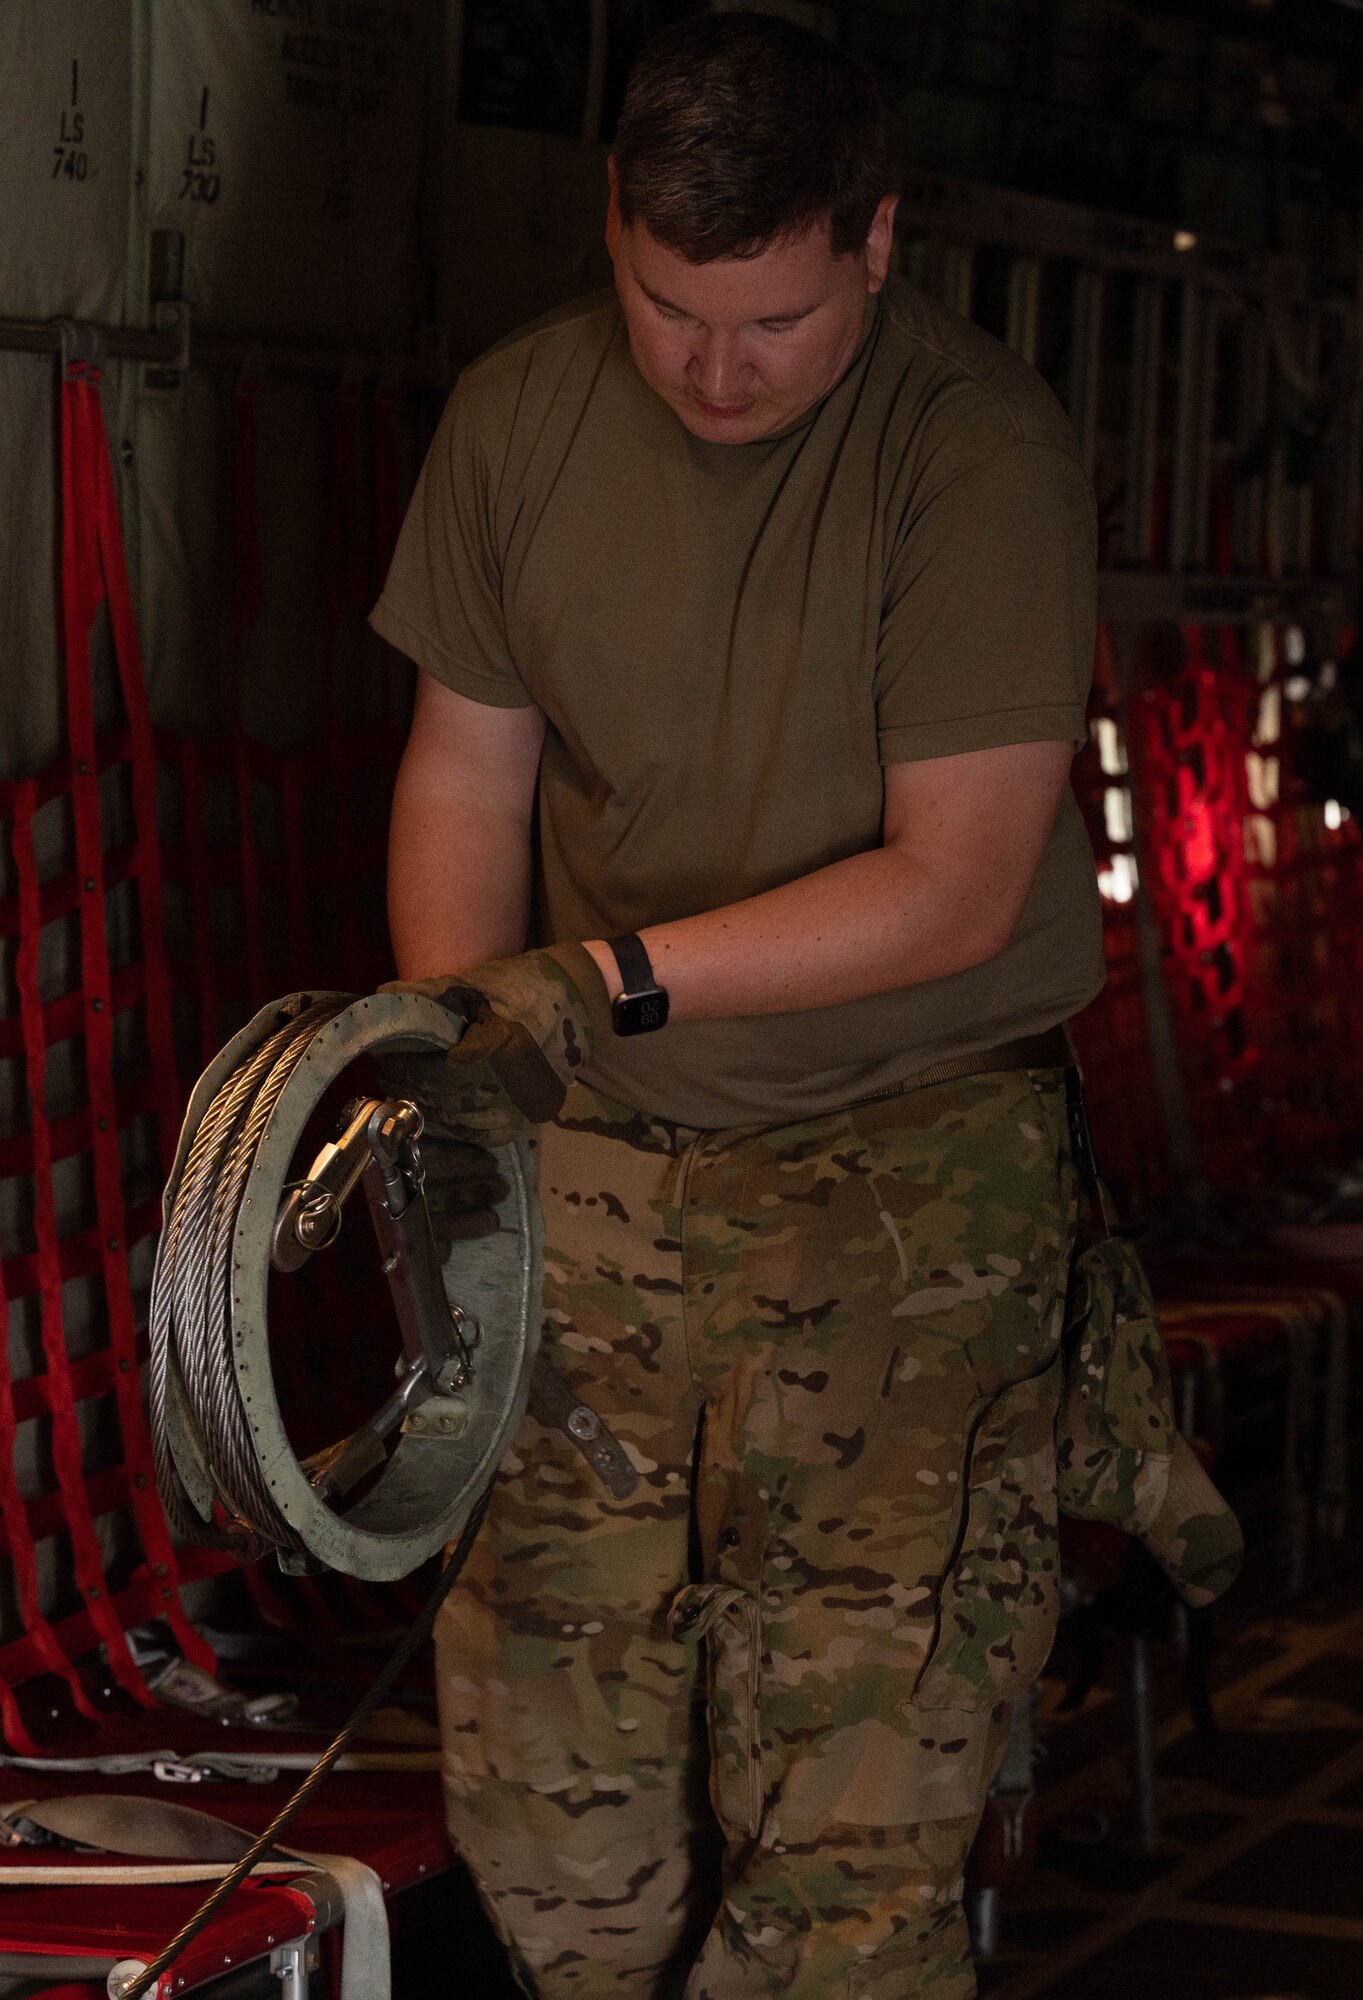 An Airman reels in an anchor cable.